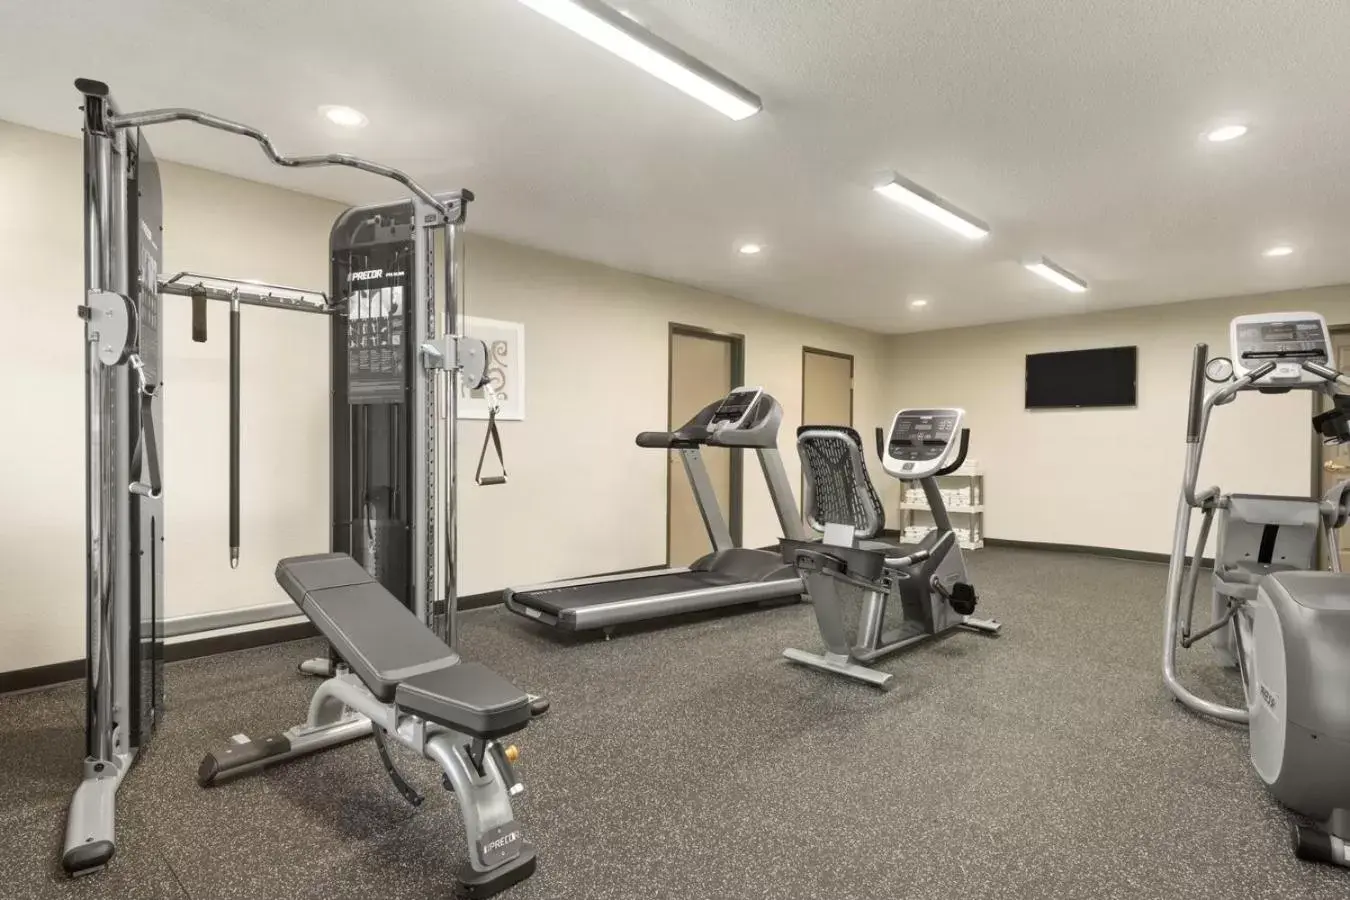 Fitness centre/facilities, Fitness Center/Facilities in Country Inn & Suites by Radisson, Platteville, WI